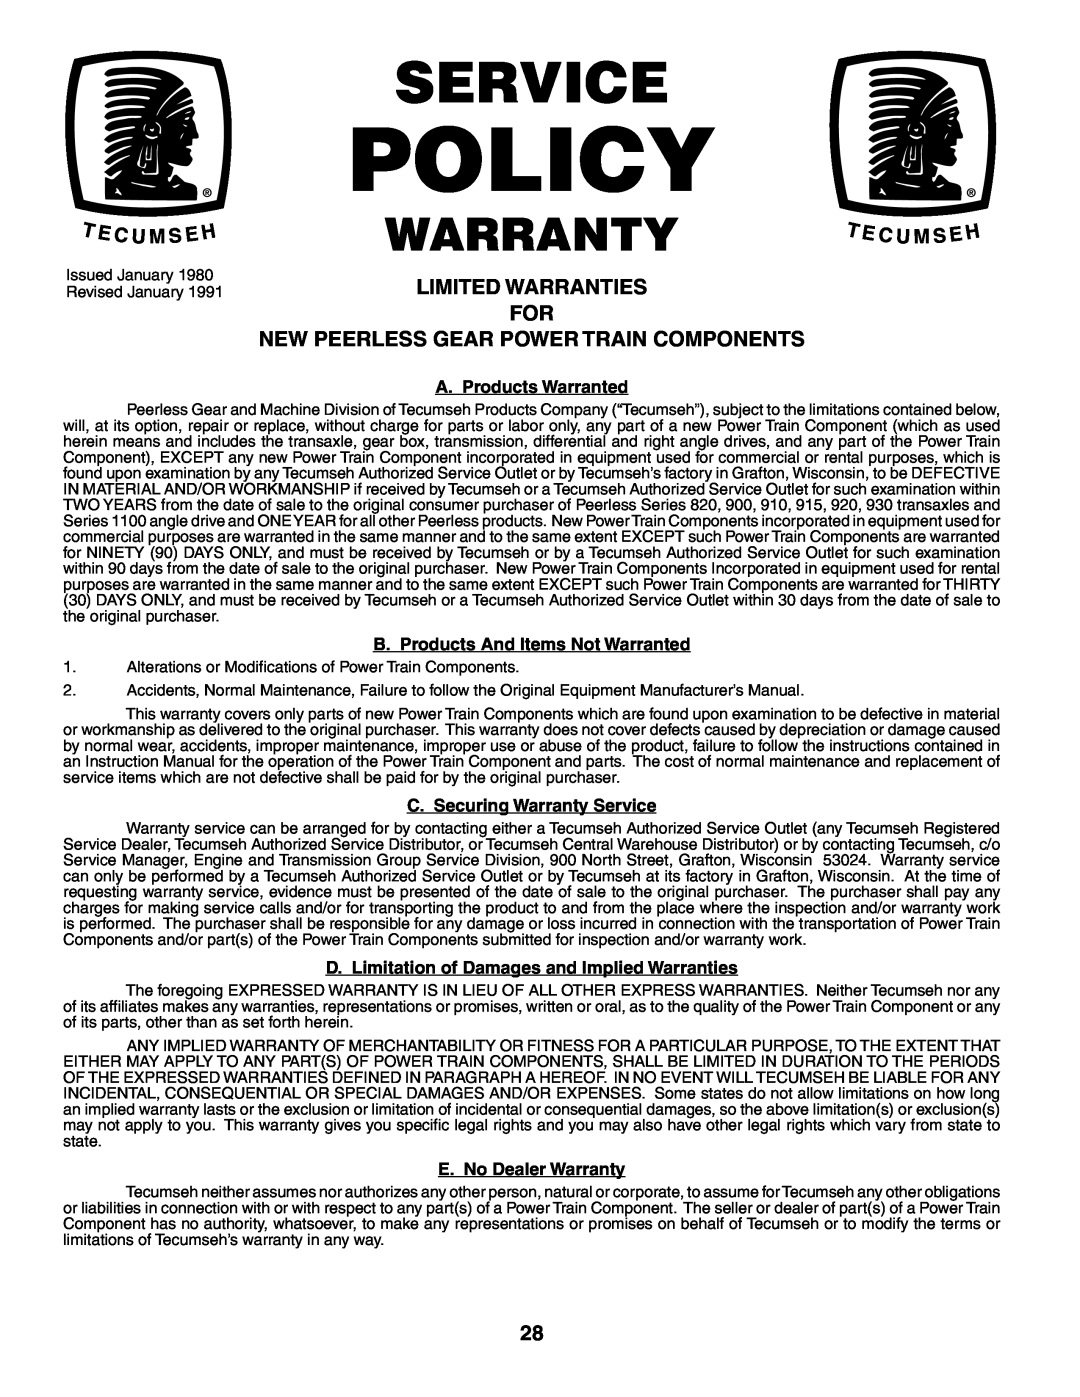 Poulan 194831 manual Limited Warranties For New Peerless Gear Power Train Components, Policy, Service, Warranty 